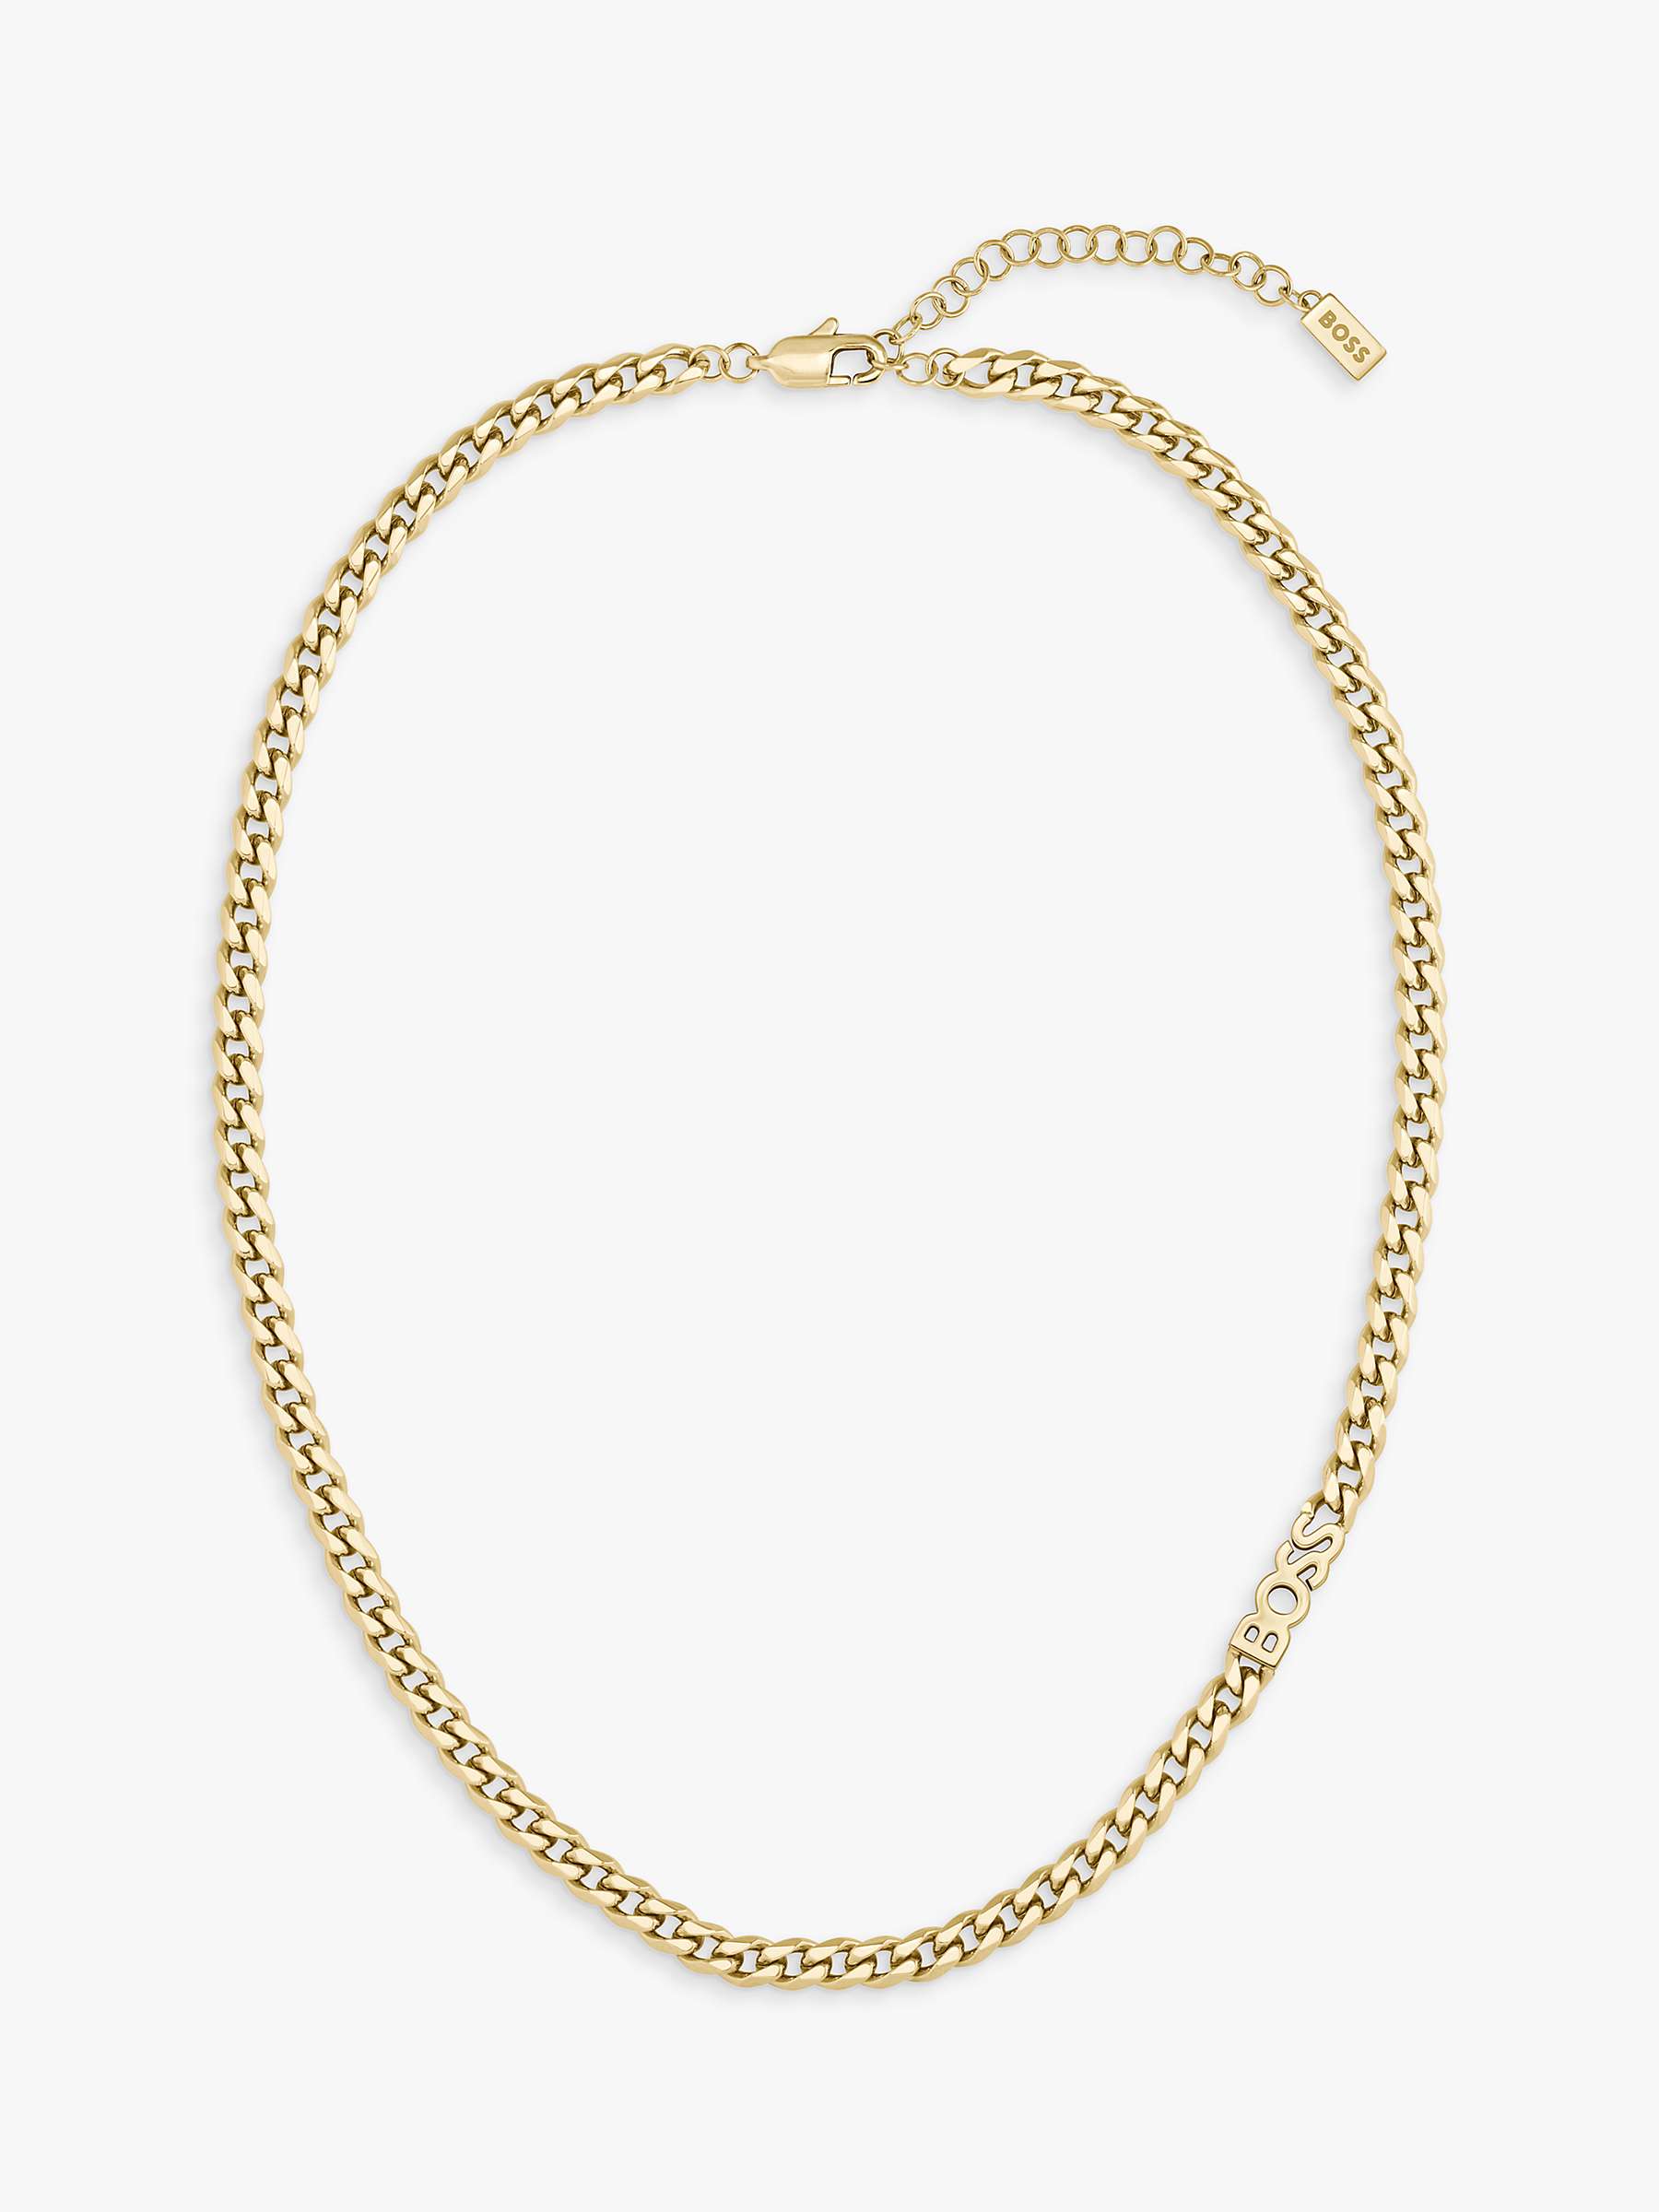 Buy HUGO BOSS Kassy Curb Chain Necklace, Gold Online at johnlewis.com